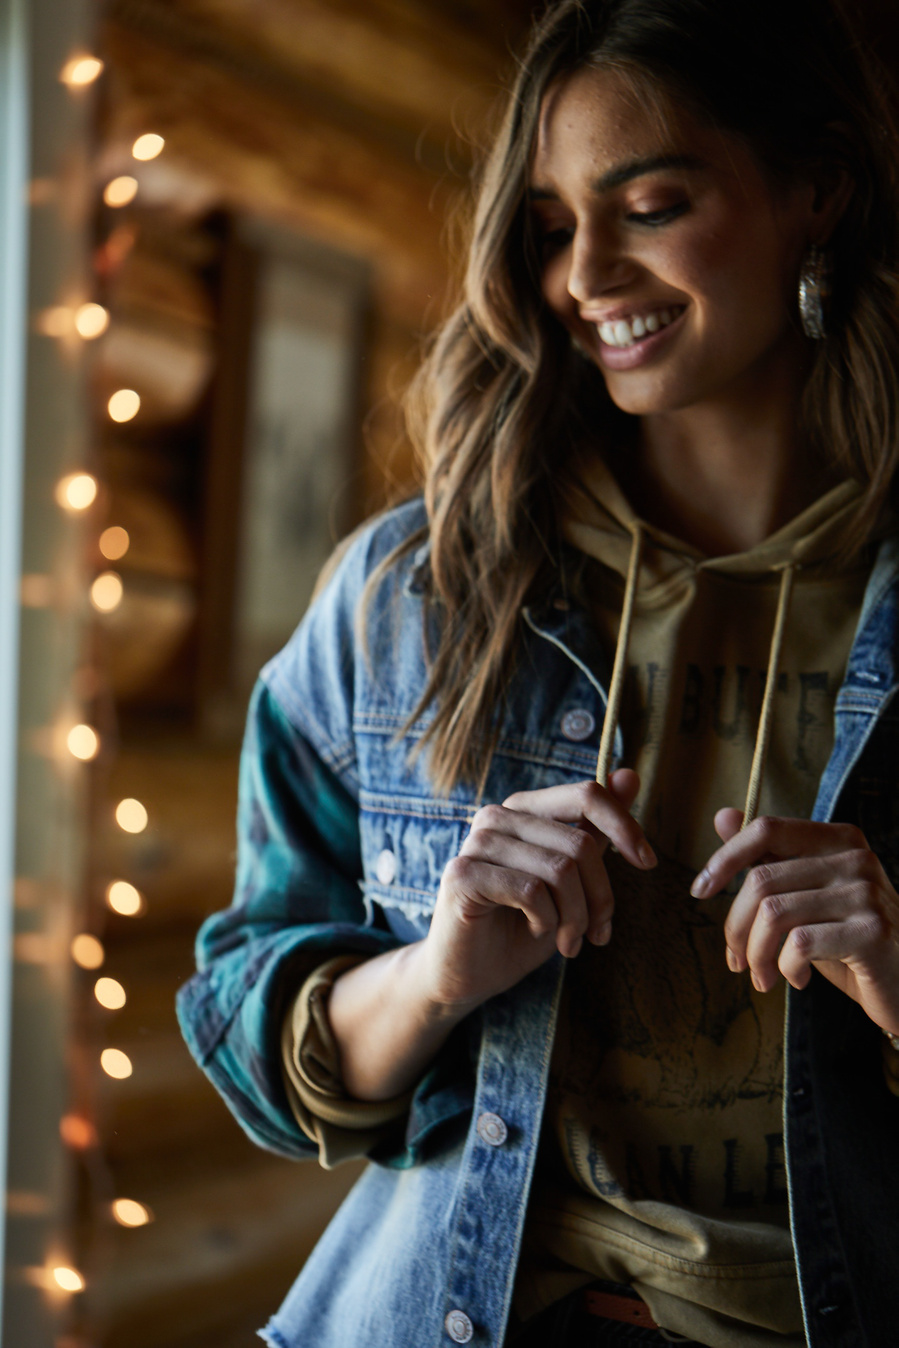 Female fashion model poses in sweatshirt and jean jacket with sleeves rolled up and hands holding the sweatshirt ties in a winter cabin. Fashion lifestyle photography for The Buckle